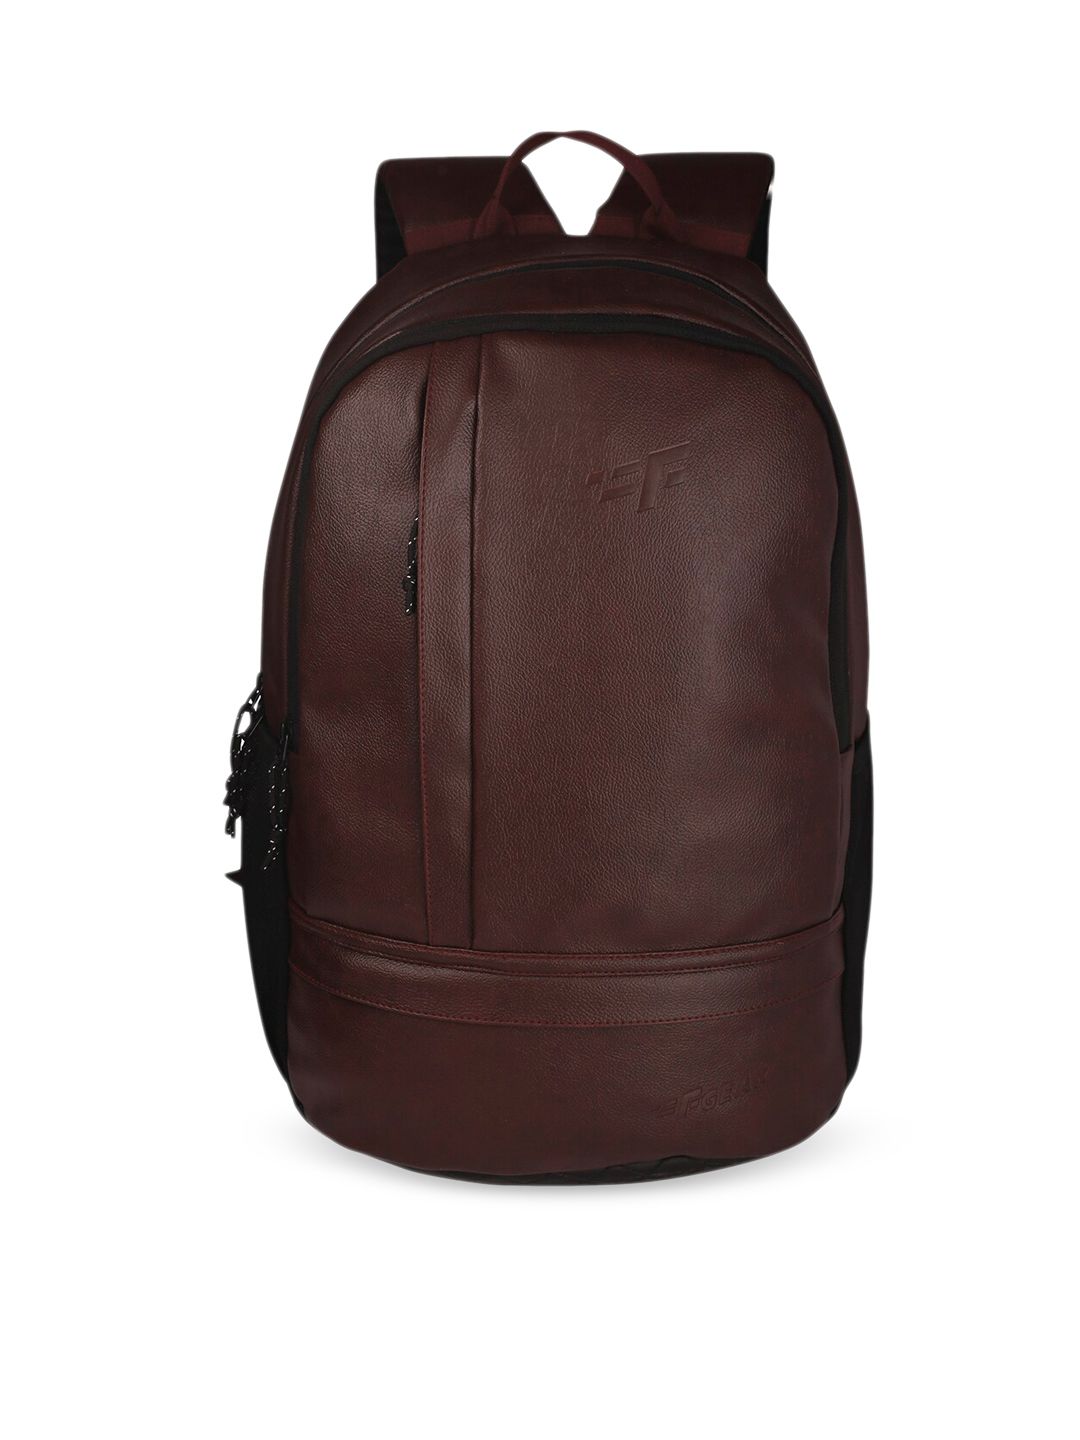 F Gear Unisex Brown Textured Backpack Price in India